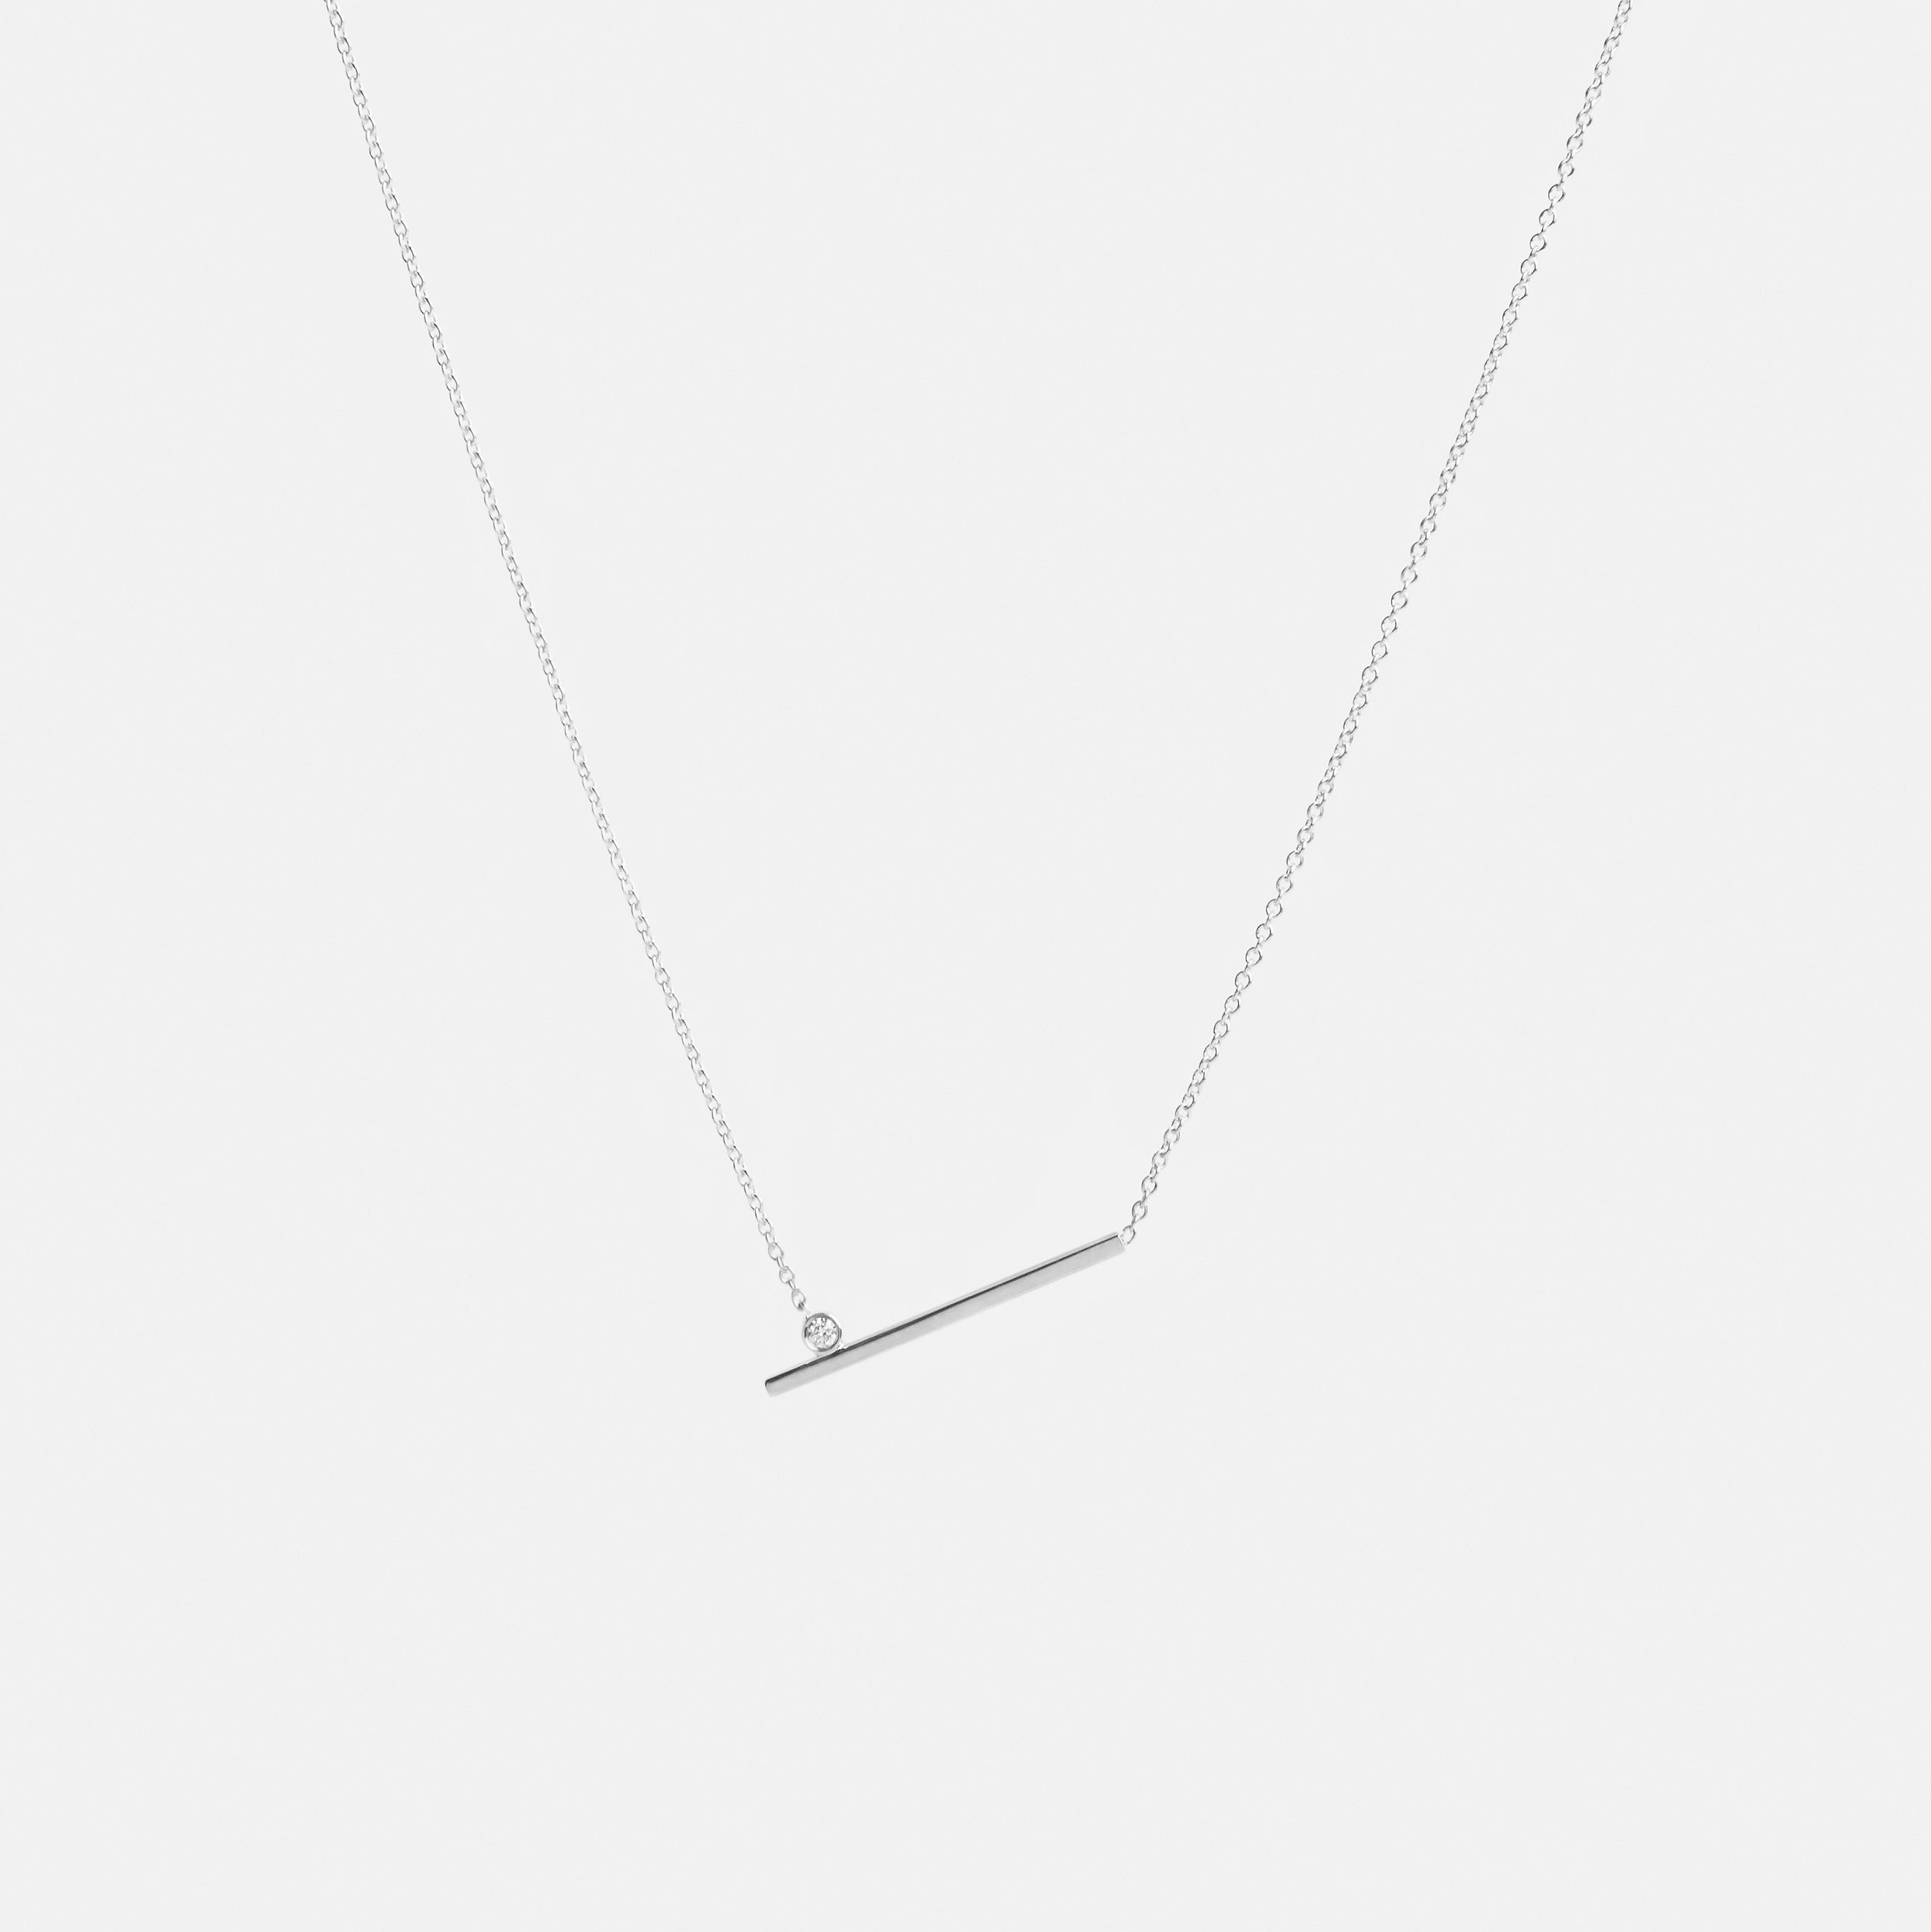 Livi Unconventional Necklace in 14k White Gold Set with White Diamond By SHW Fine Jewelry NYC